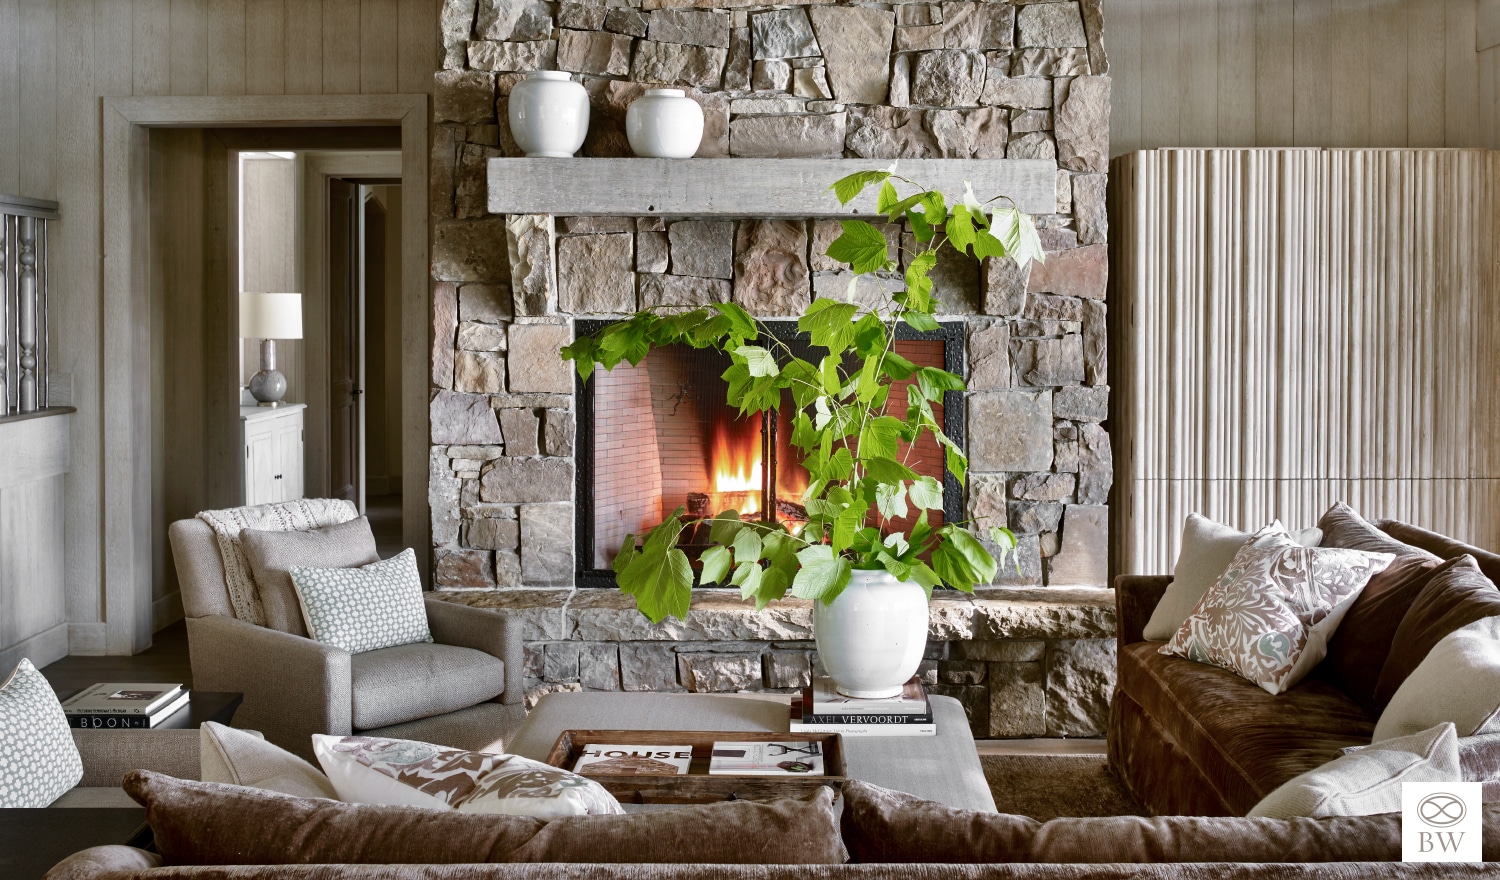 Tranquil Walloon Lake | Exterior Architect: Greg Pressley | Interior Architect: Peter Block | Interior Design: Beth Webb | Photography Emily Followill living room with stone fireplace. living room ideas | living room design | paneling | blonde wood